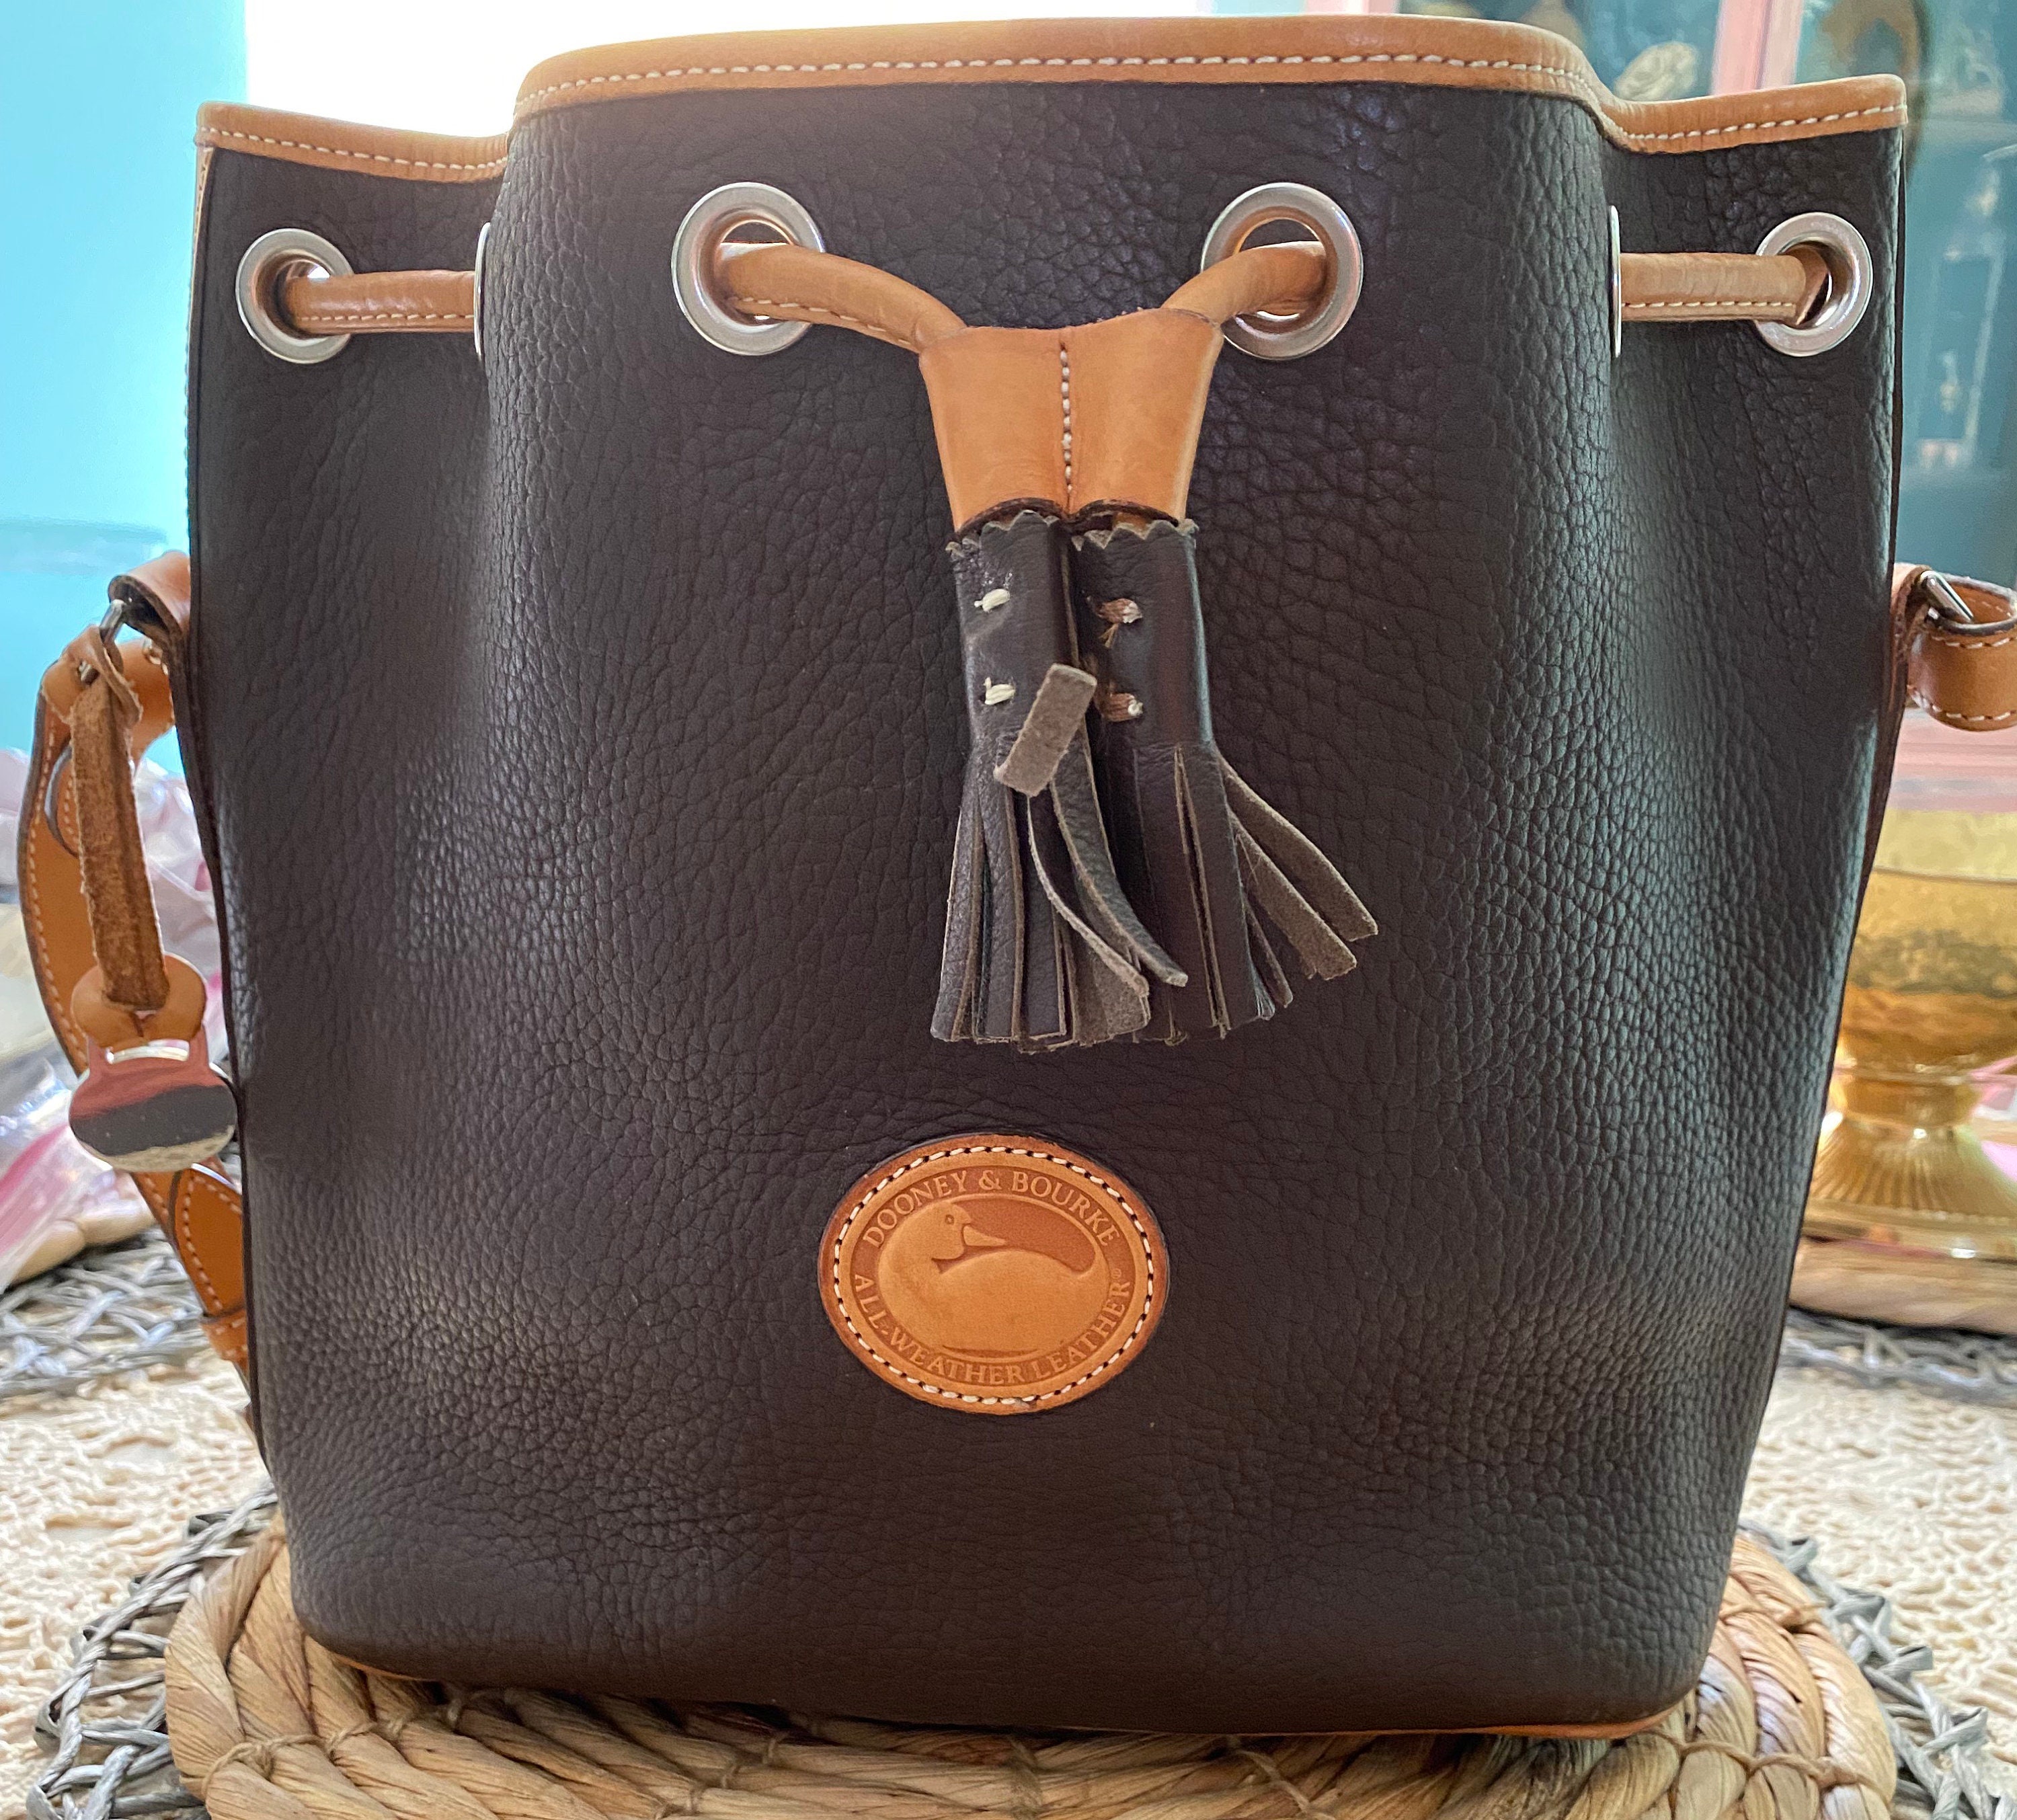 Vintage Dooney and Bourke Leather Chocolate and Peanut Butter Handbag